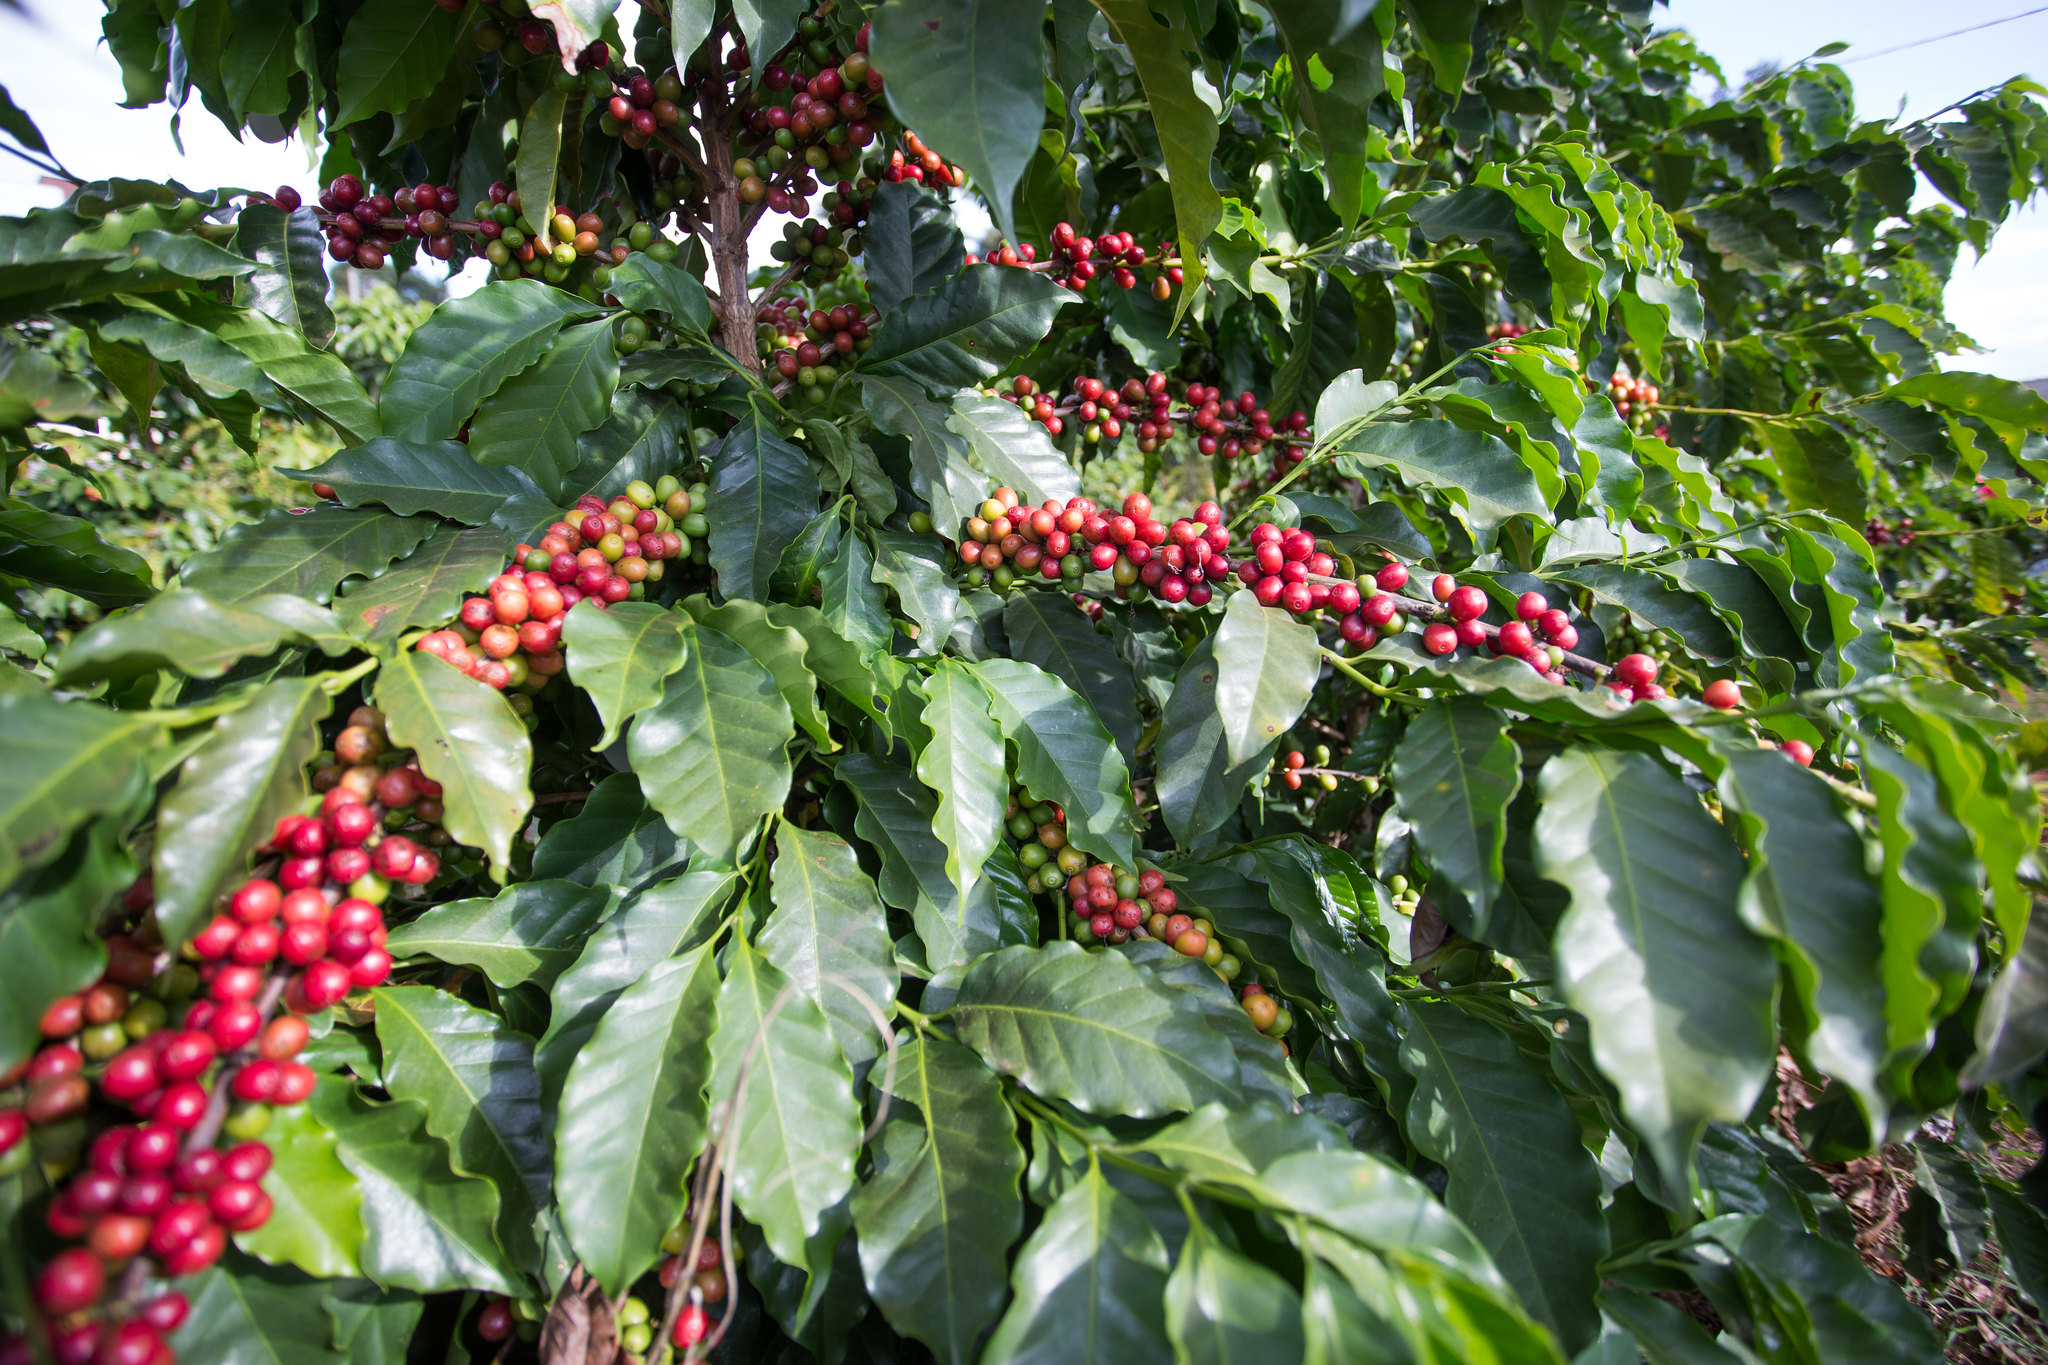 Coffees from Brazil generate US$8,5 billion in foreign exchange revenue with exports of 36,6 million bags in one year